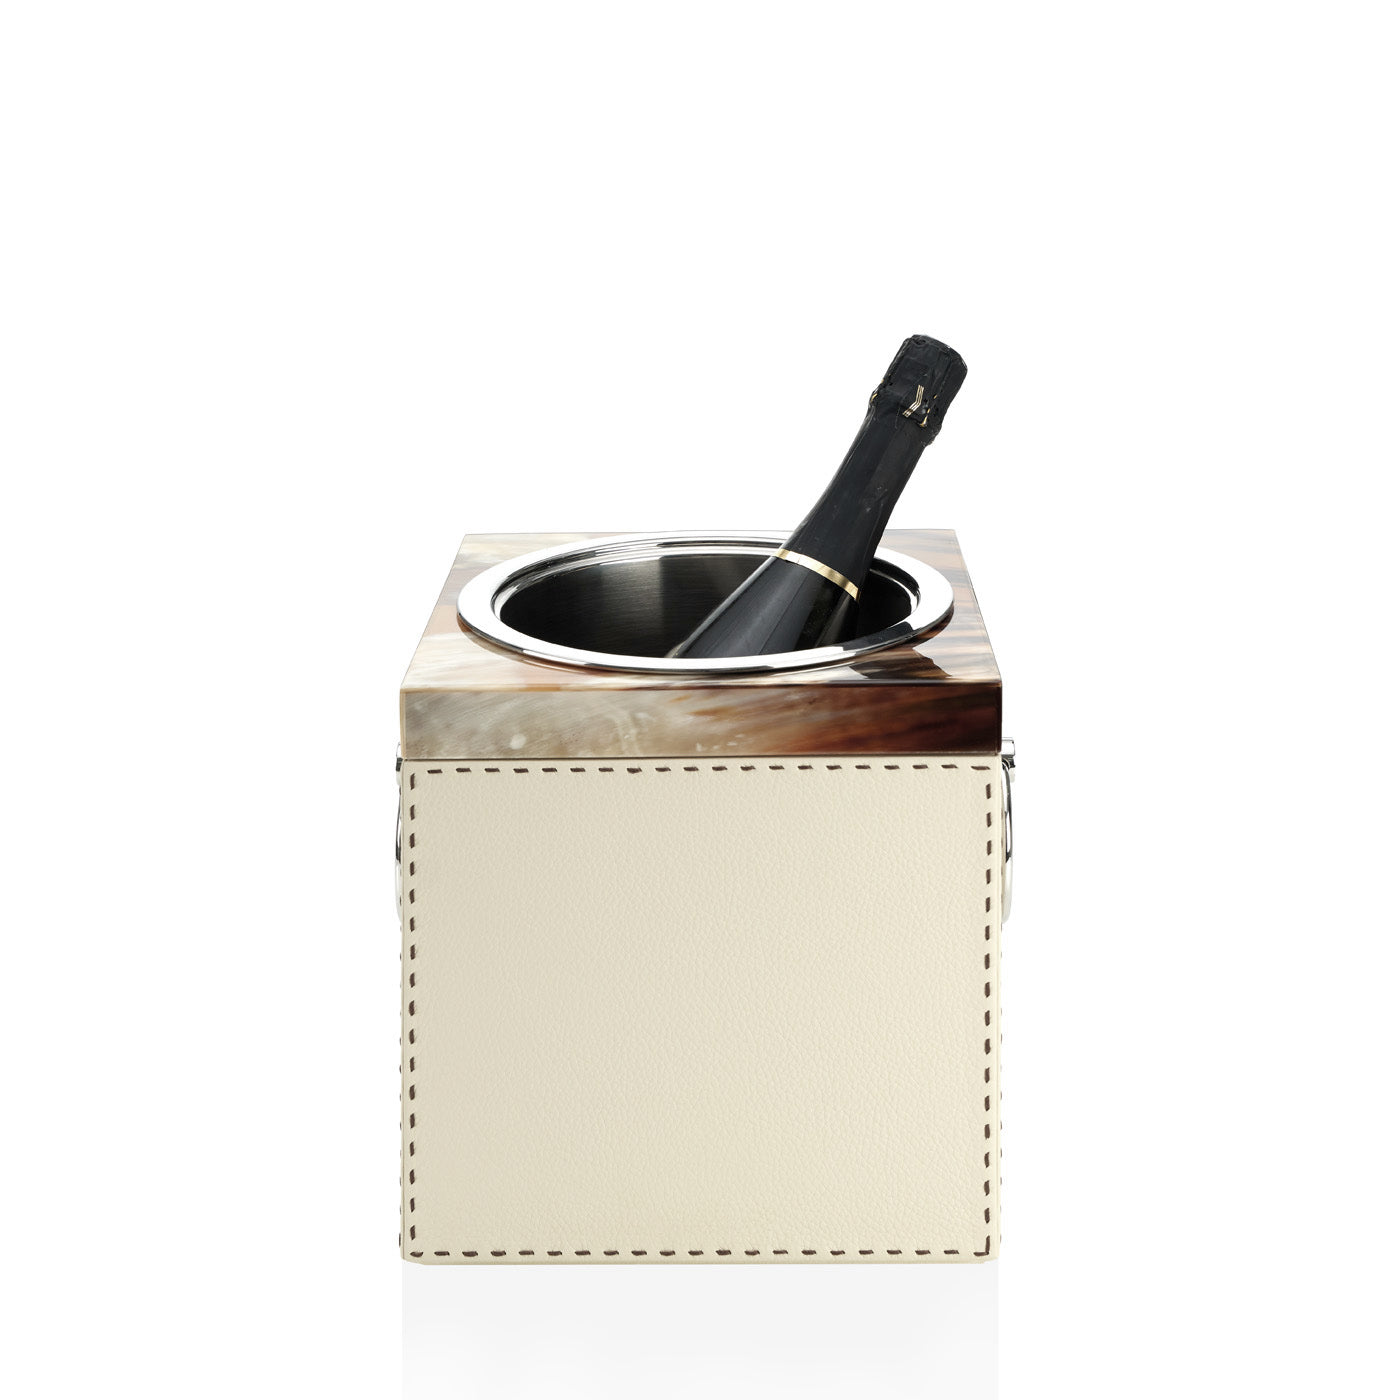 Arcahorn Nives Champagne Bucket | Glossy Horn and Aida Pebbled Leather in Ice-cream with Handmade Dark Brown Stitching | Removable Stainless Steel Liner and Handles | Ideal for Yacht or Office | Explore Luxury Home Accessories at 2Jour Concierge, #1 luxury high-end gift & lifestyle shop